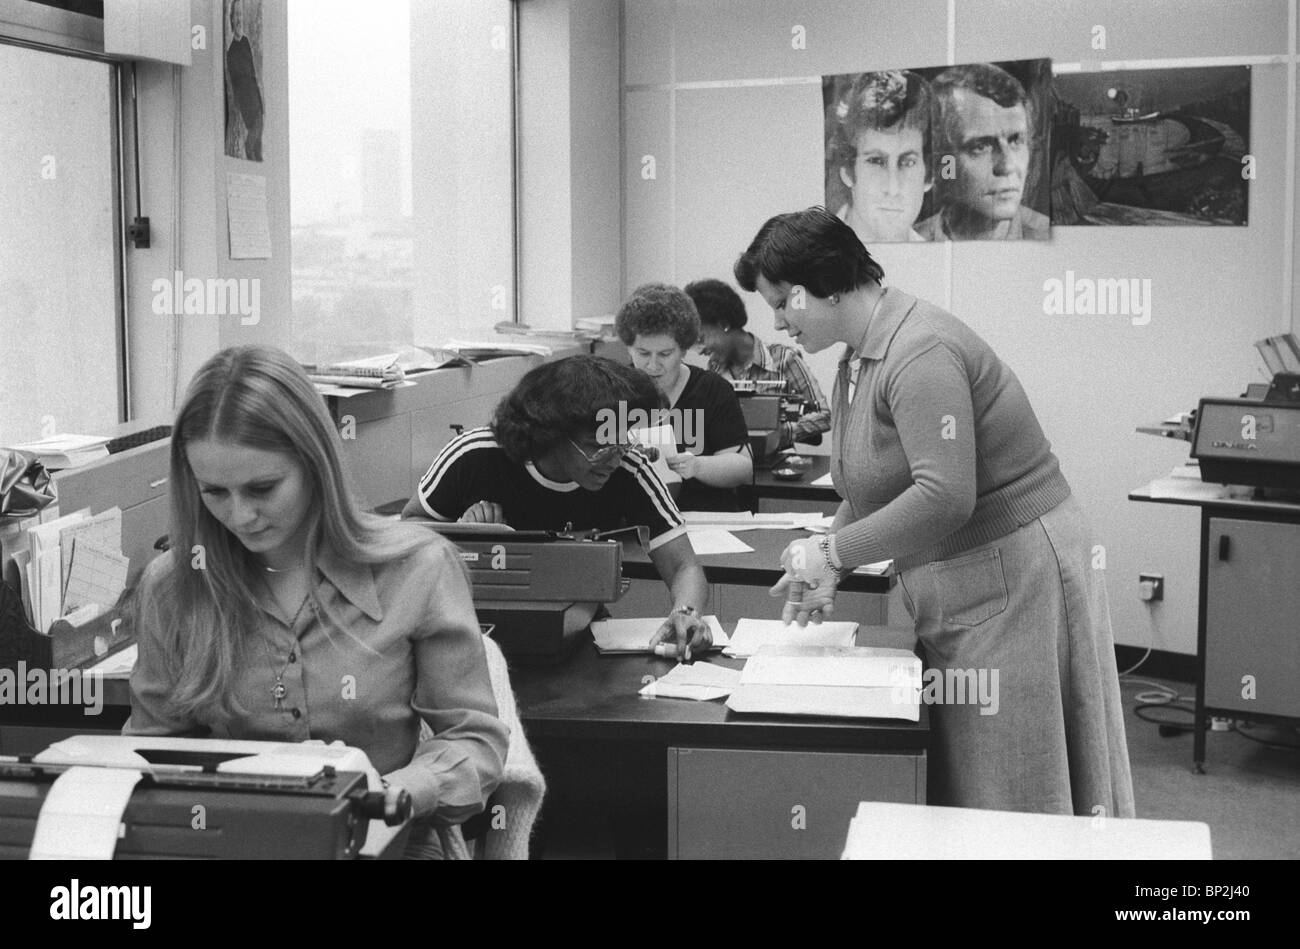 Typing Pool typist typists using old  fashioned typewriters. City of London. Pinup posters of Starsky and Hutch on the wall. 1970s office work. 1978 HOMER SYKES Stock Photo